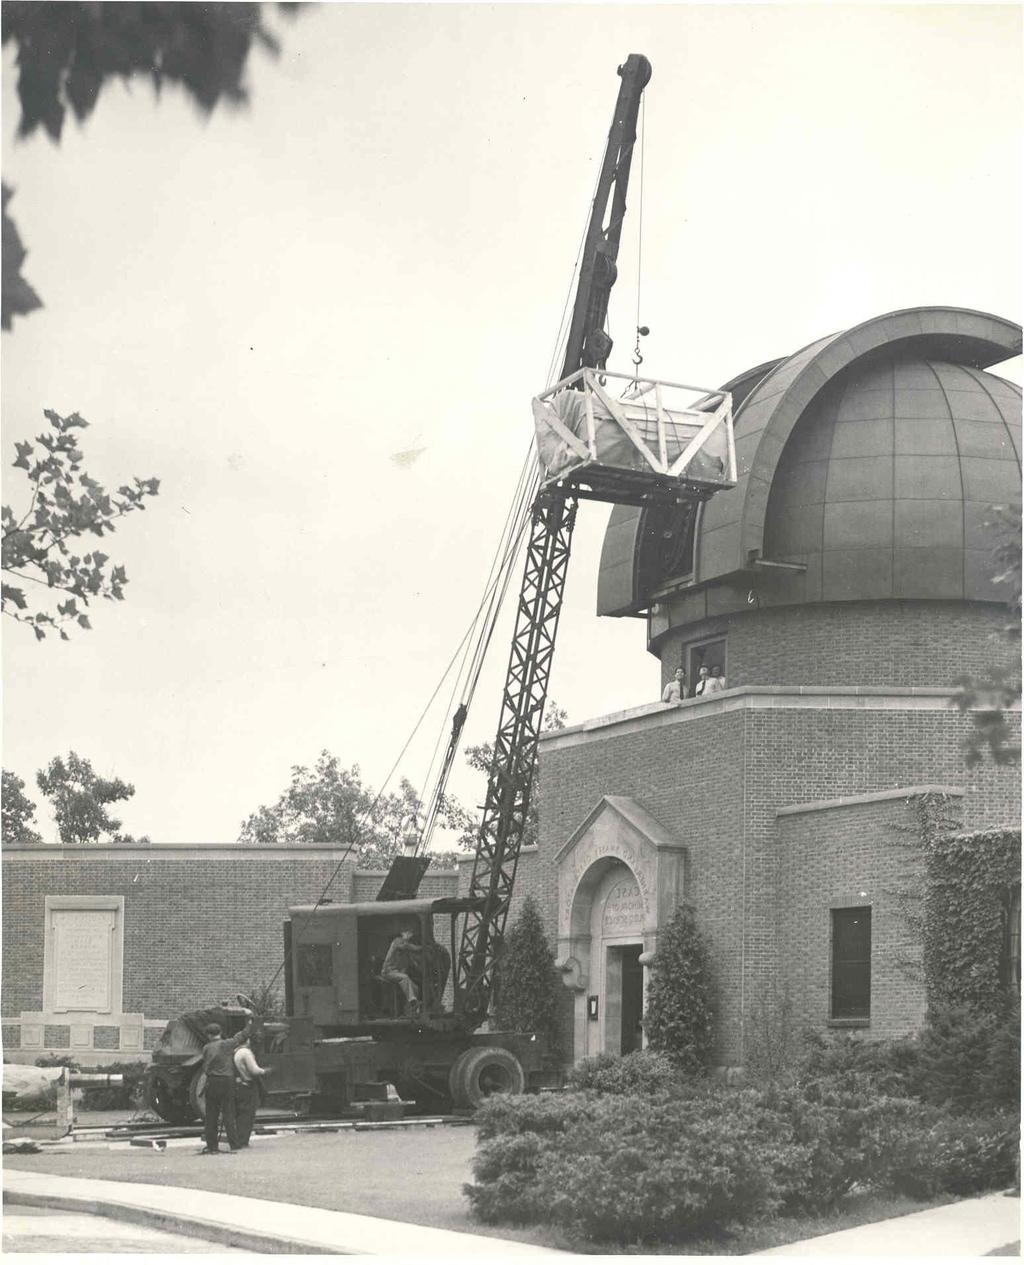 The Schmidt being installed in its new dome